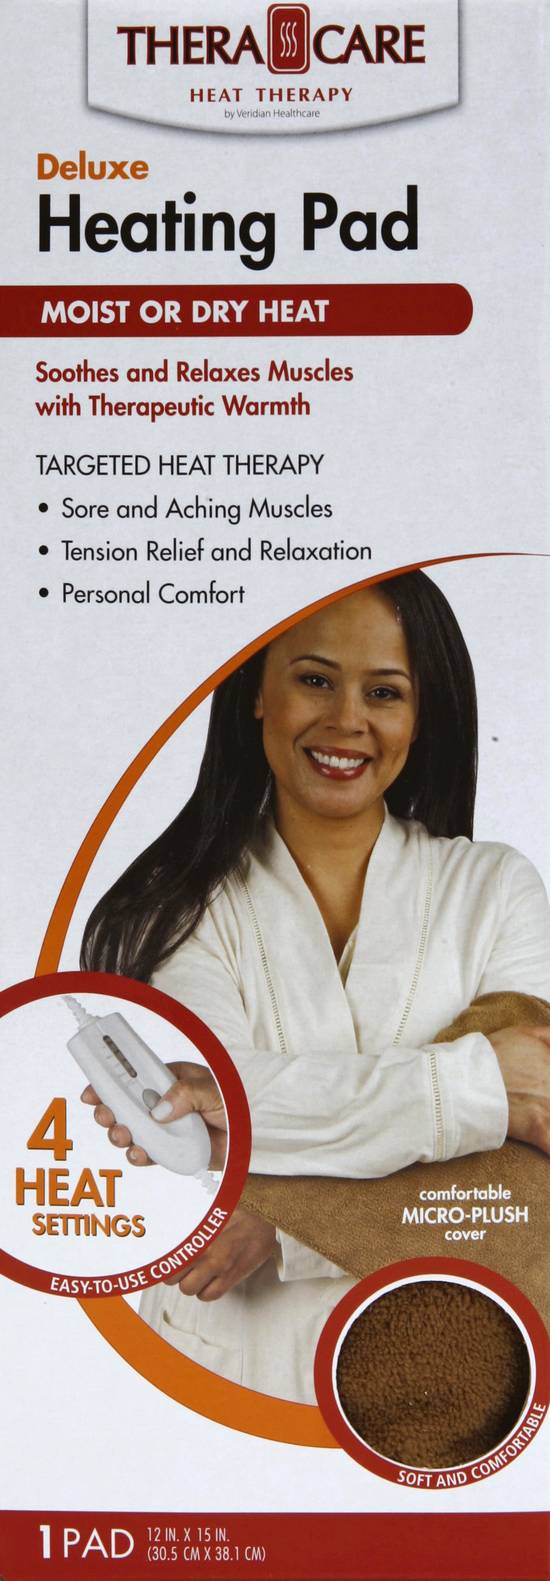 Thera Care Deluxe Heating Pad (1 ct)